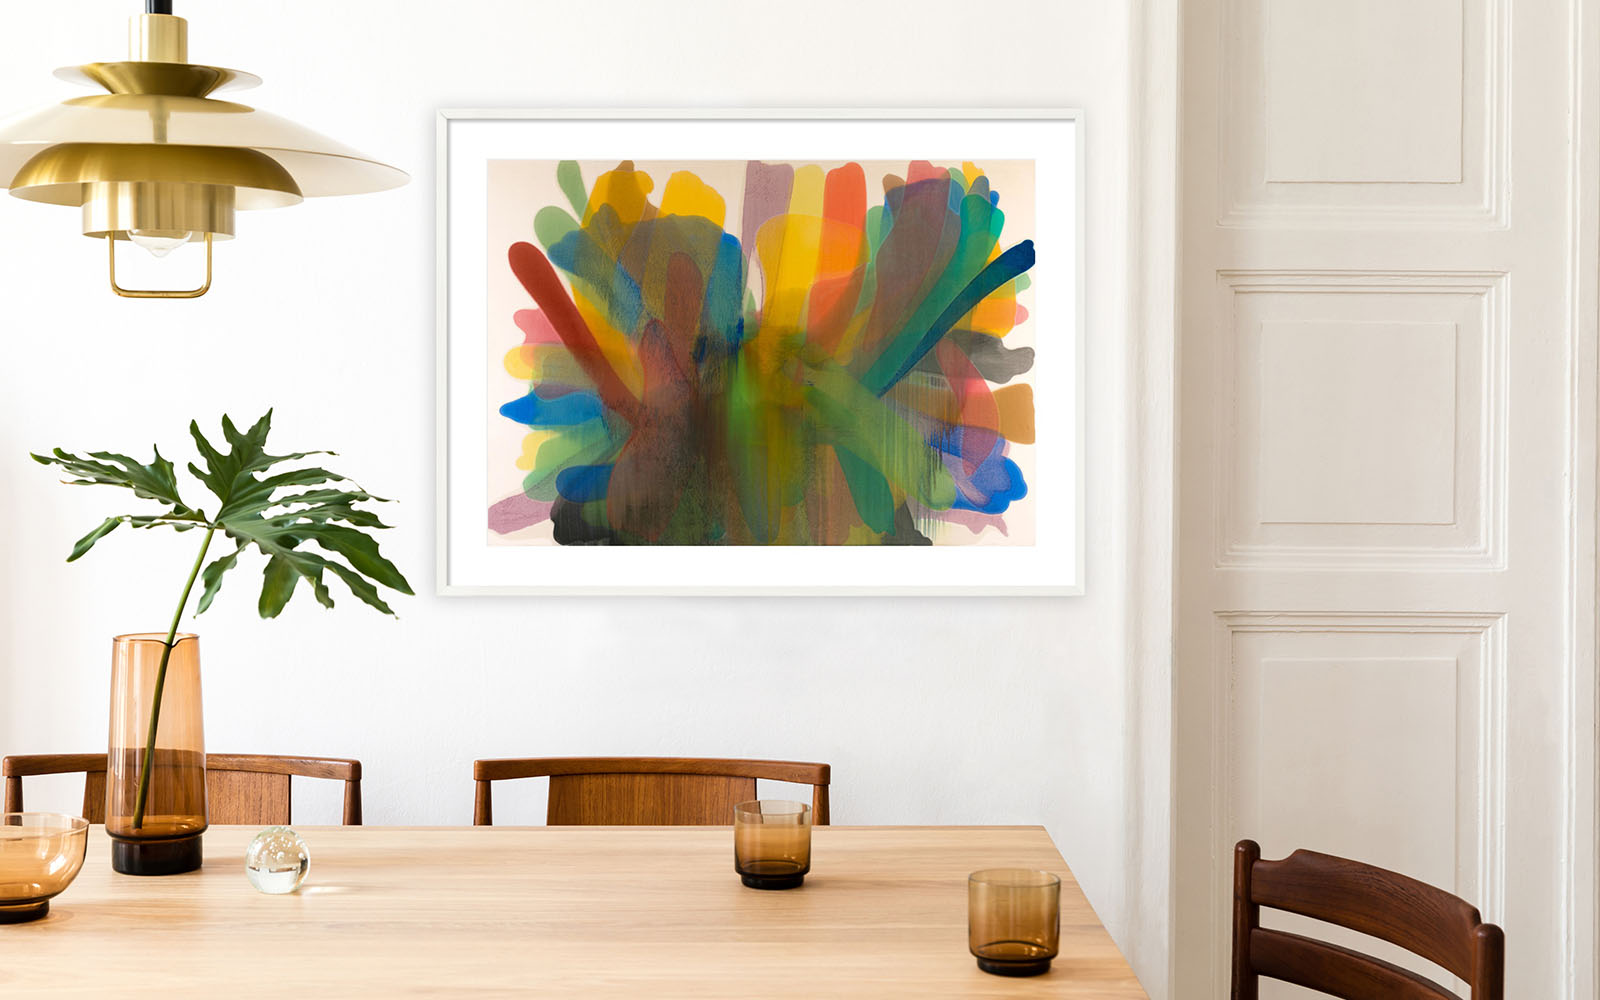 Custom framed print from the SFMOMA collection hanging on a dining room wall with contemporary design objects.